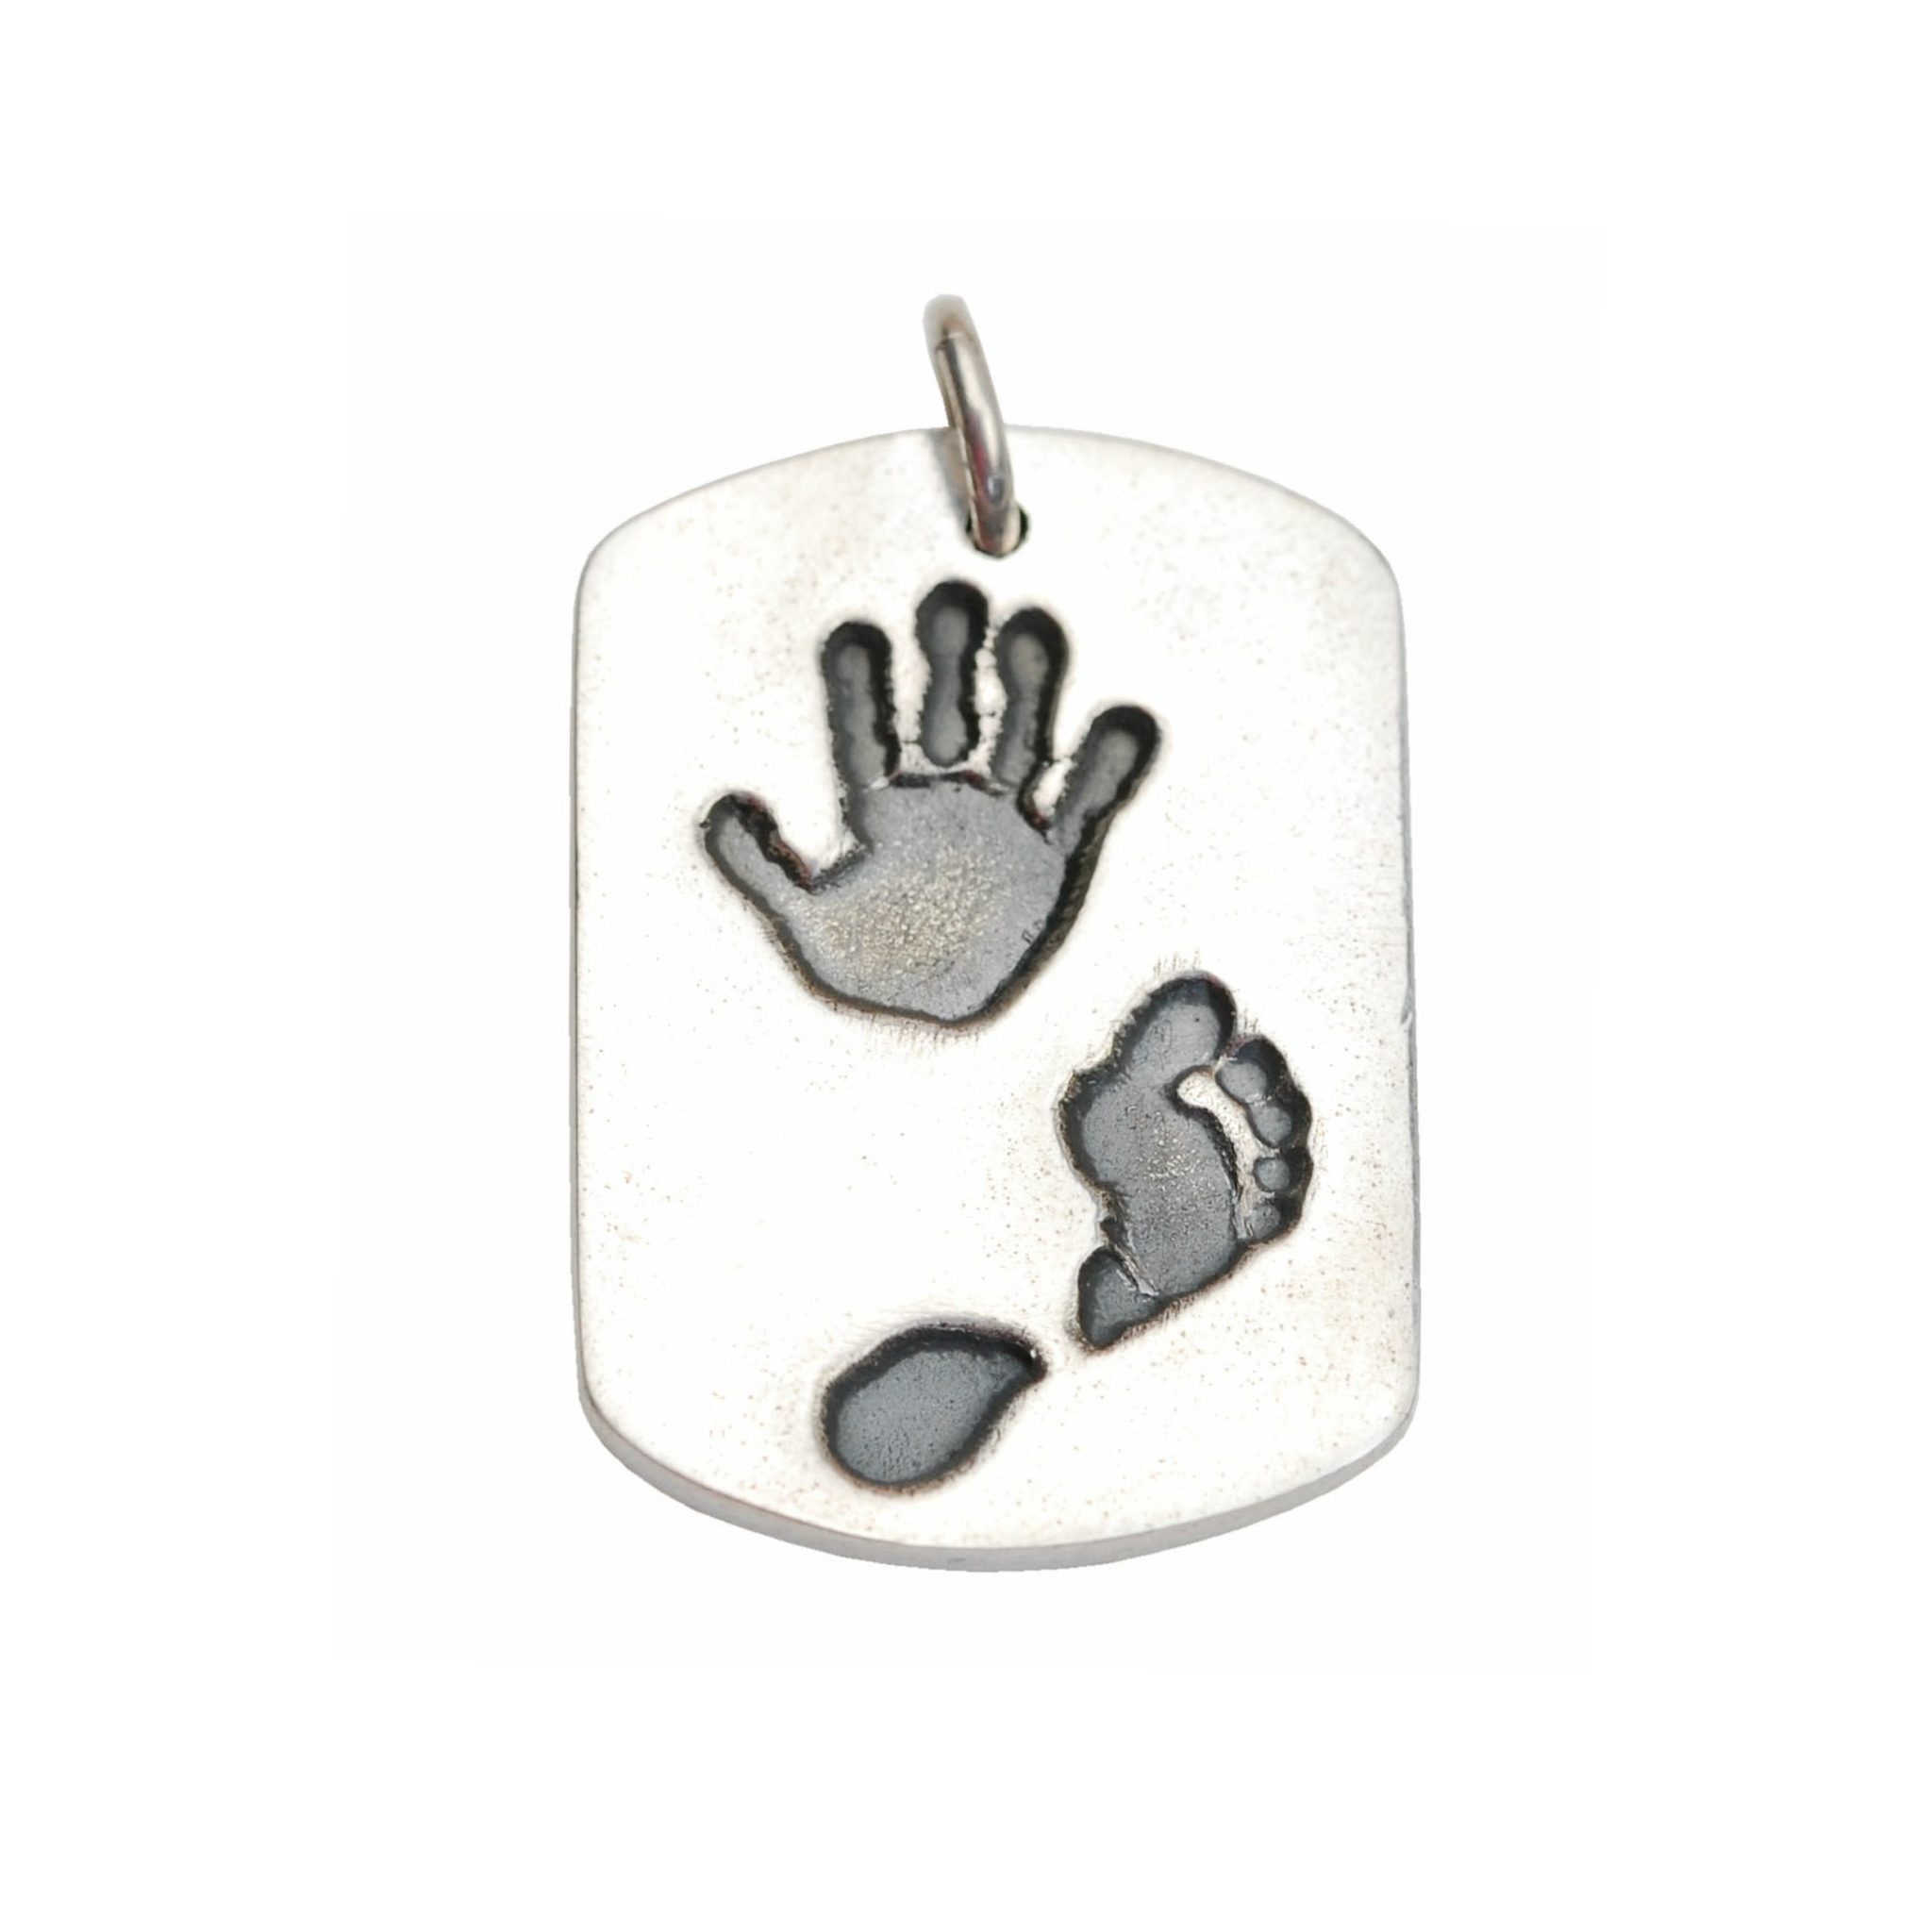 Large silver dog tag with hand and footprint